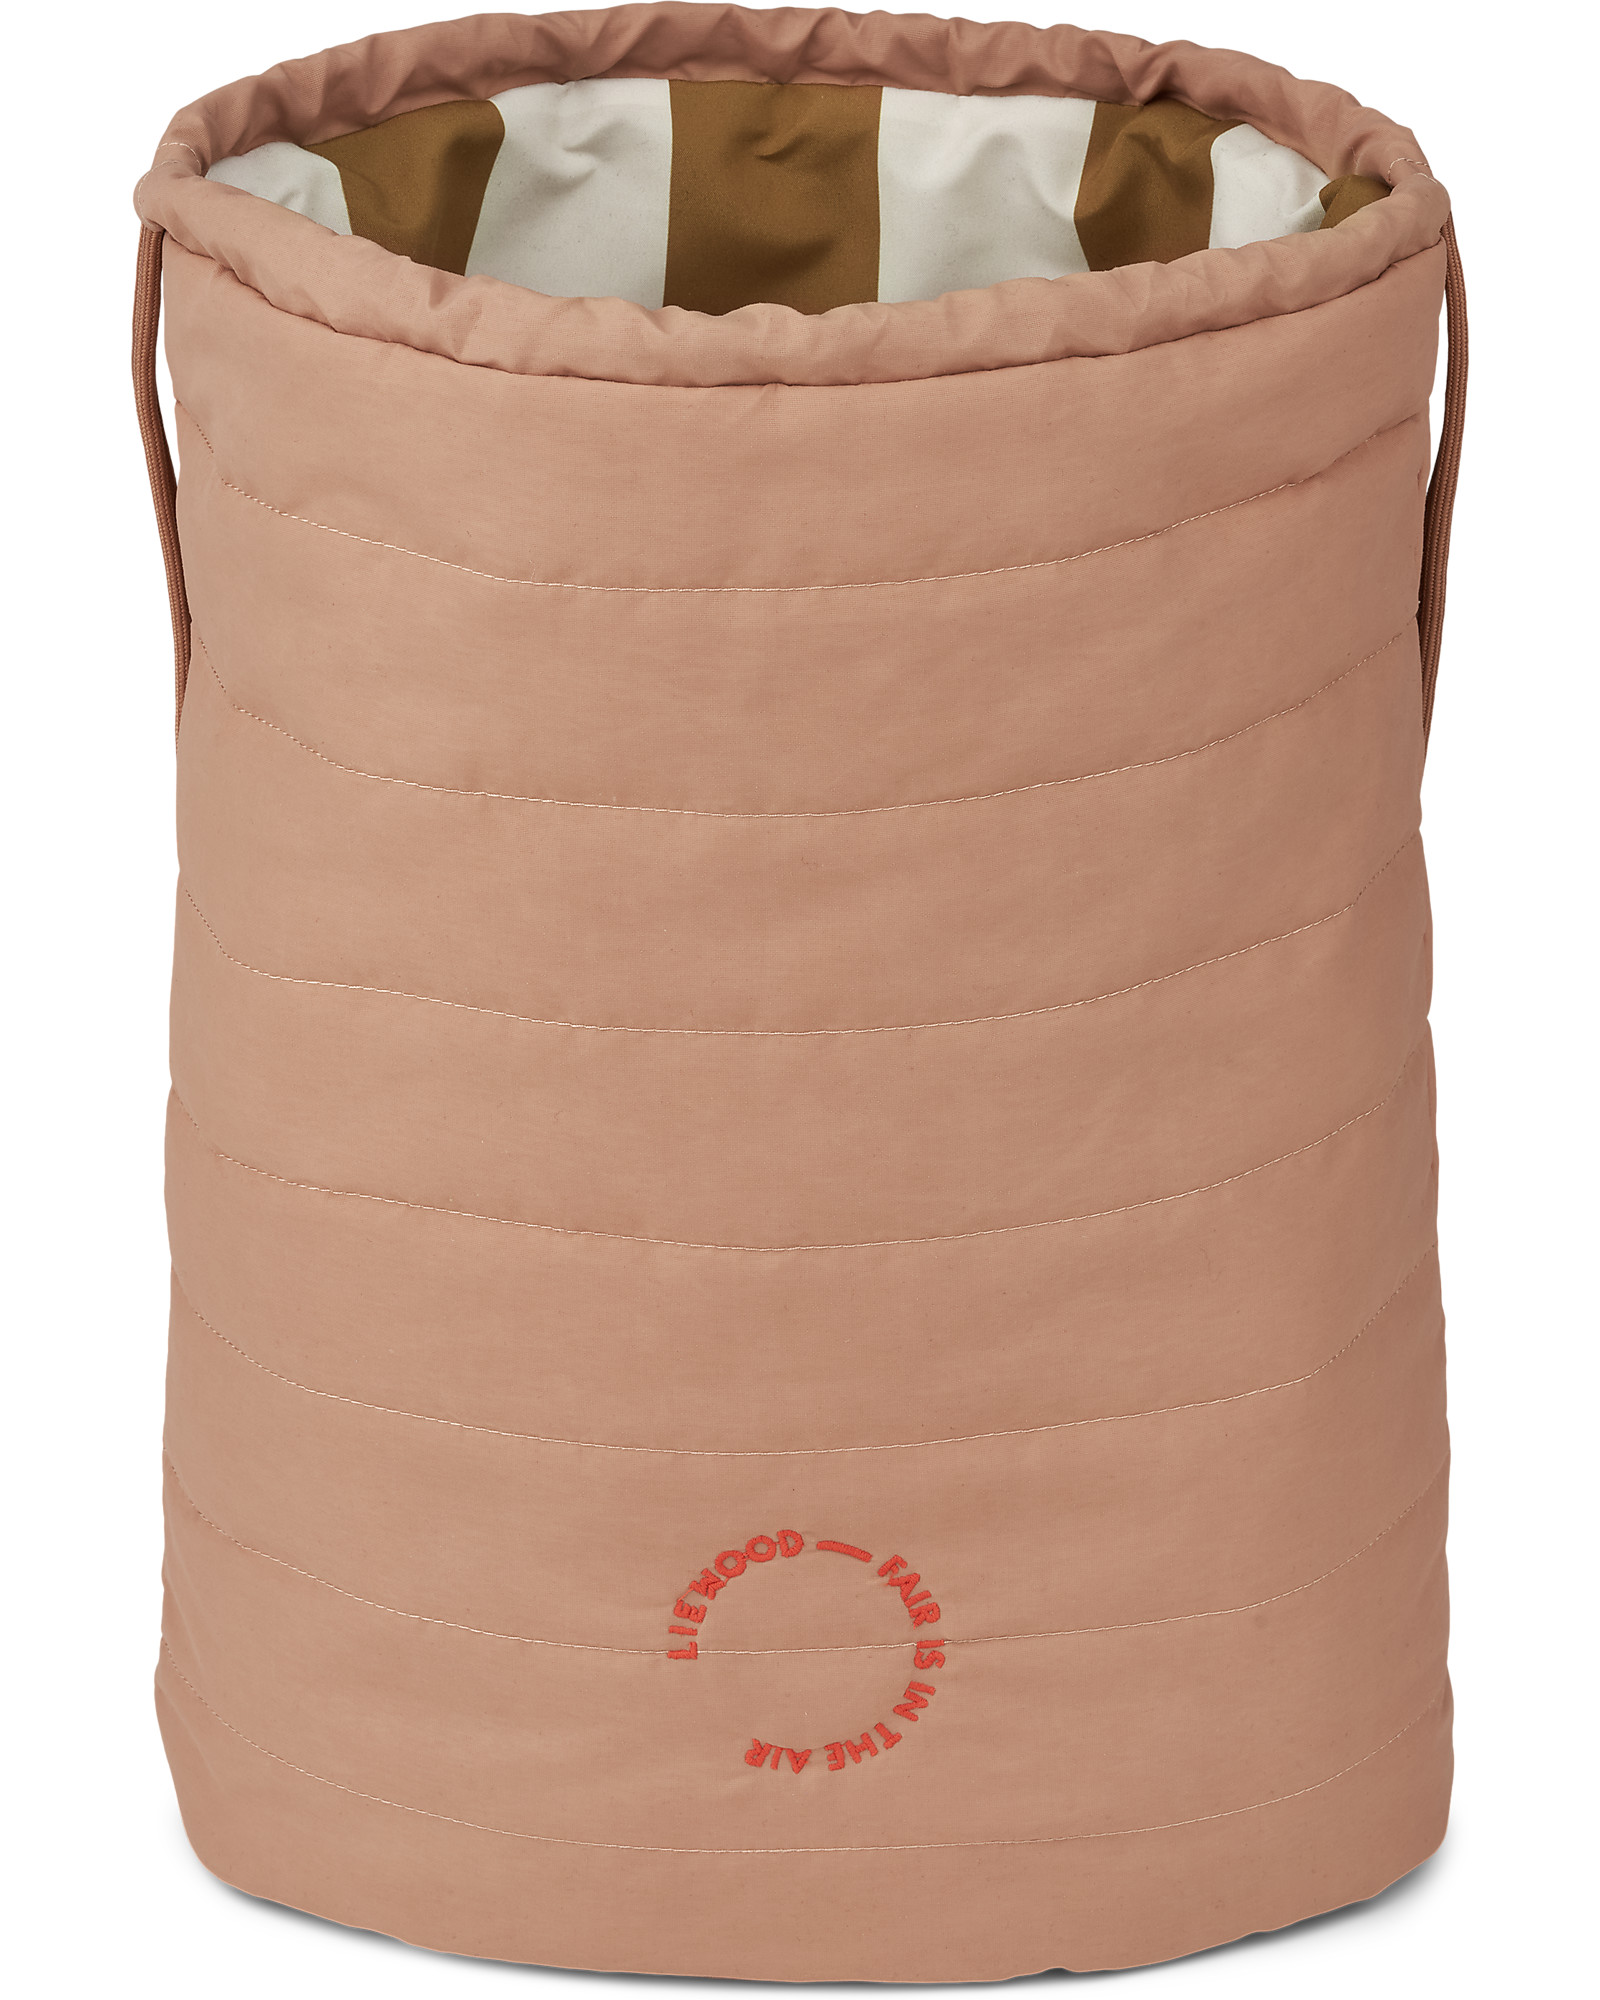 Liewood Basket - Tuscany Rose » Cheap Delivery » Kids Fashion